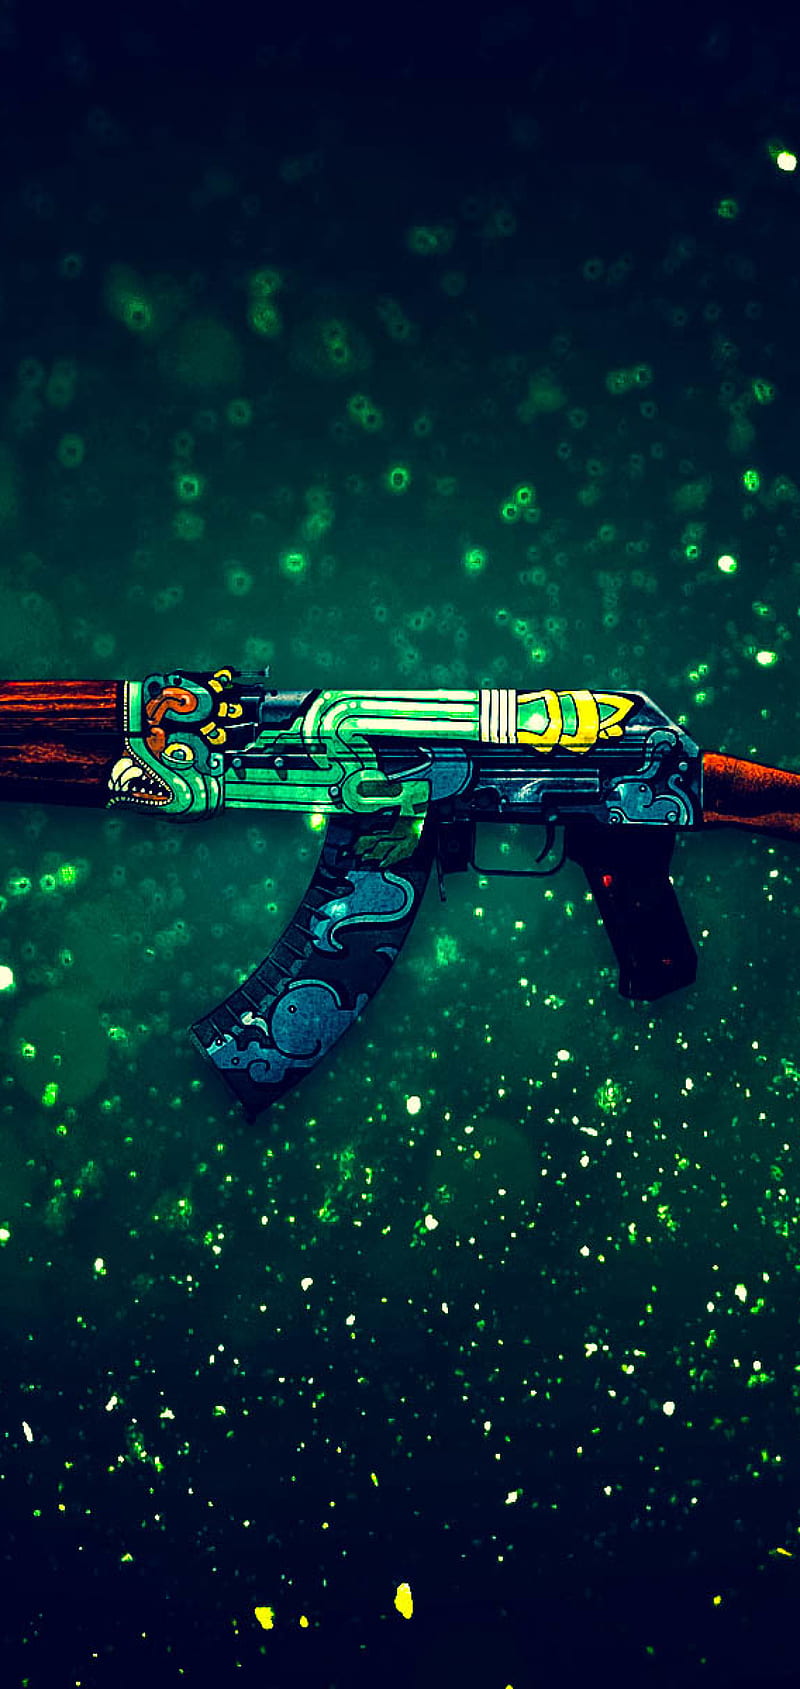 Ak 47 wallpapers for desktop, download free Ak 47 pictures and backgrounds  for PC | mob.org